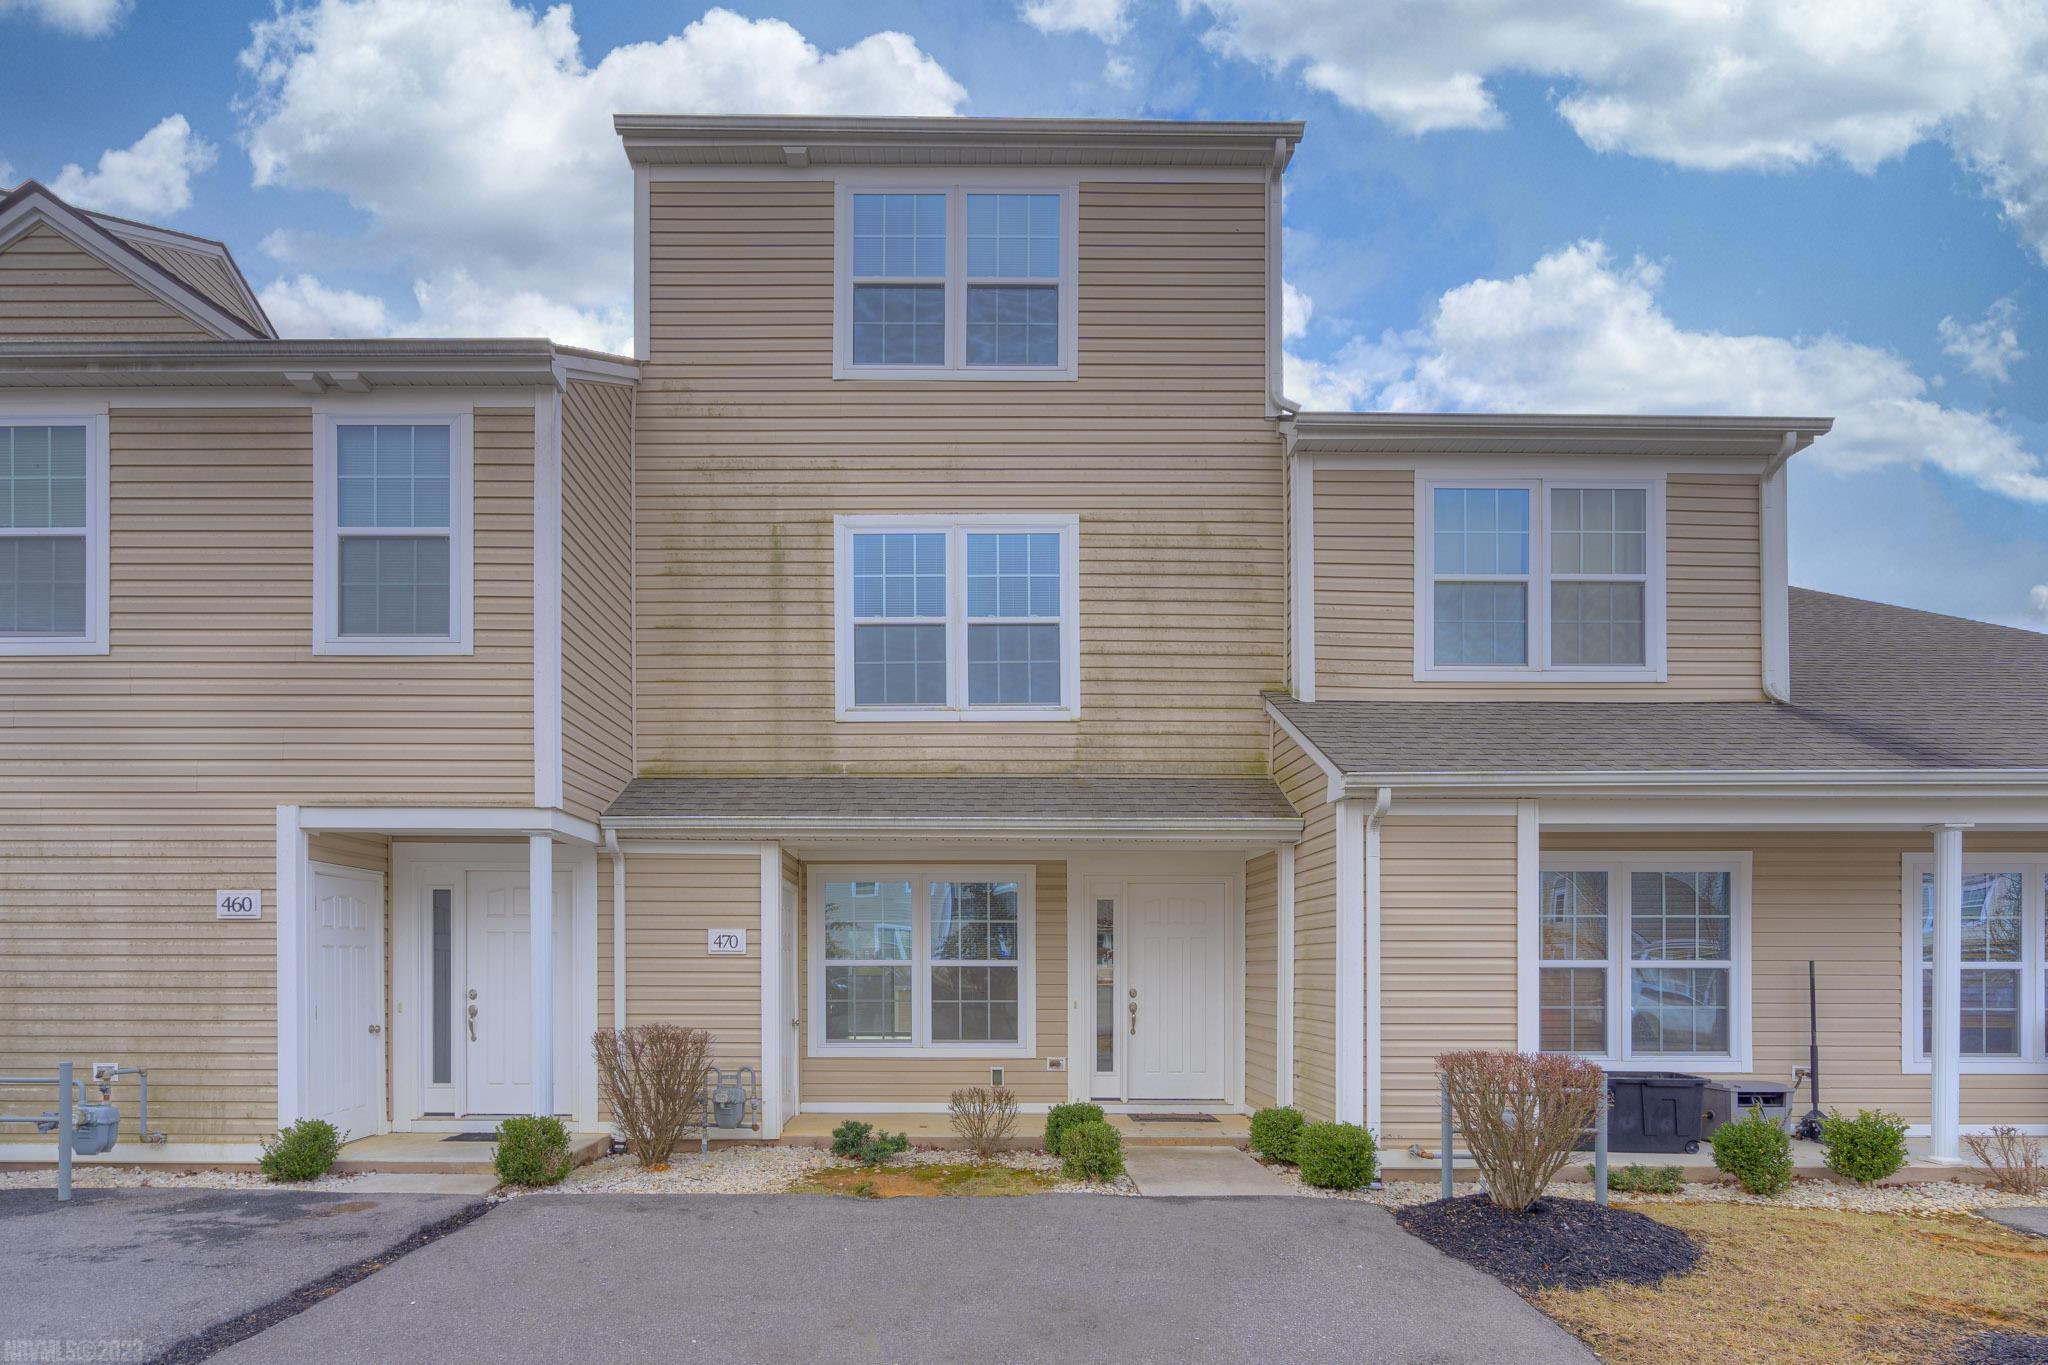 Oak Tree Townhome The Bella floorplan (3 stories). Unit features luxury plank flooring throughout, granite countertops, and more! Spacious 3 bed, 3.5 bath, Washer/Dryer included! Convenient to Huckleberry Trail, shopping, dining, and minutes from Virginia Tech Campus!